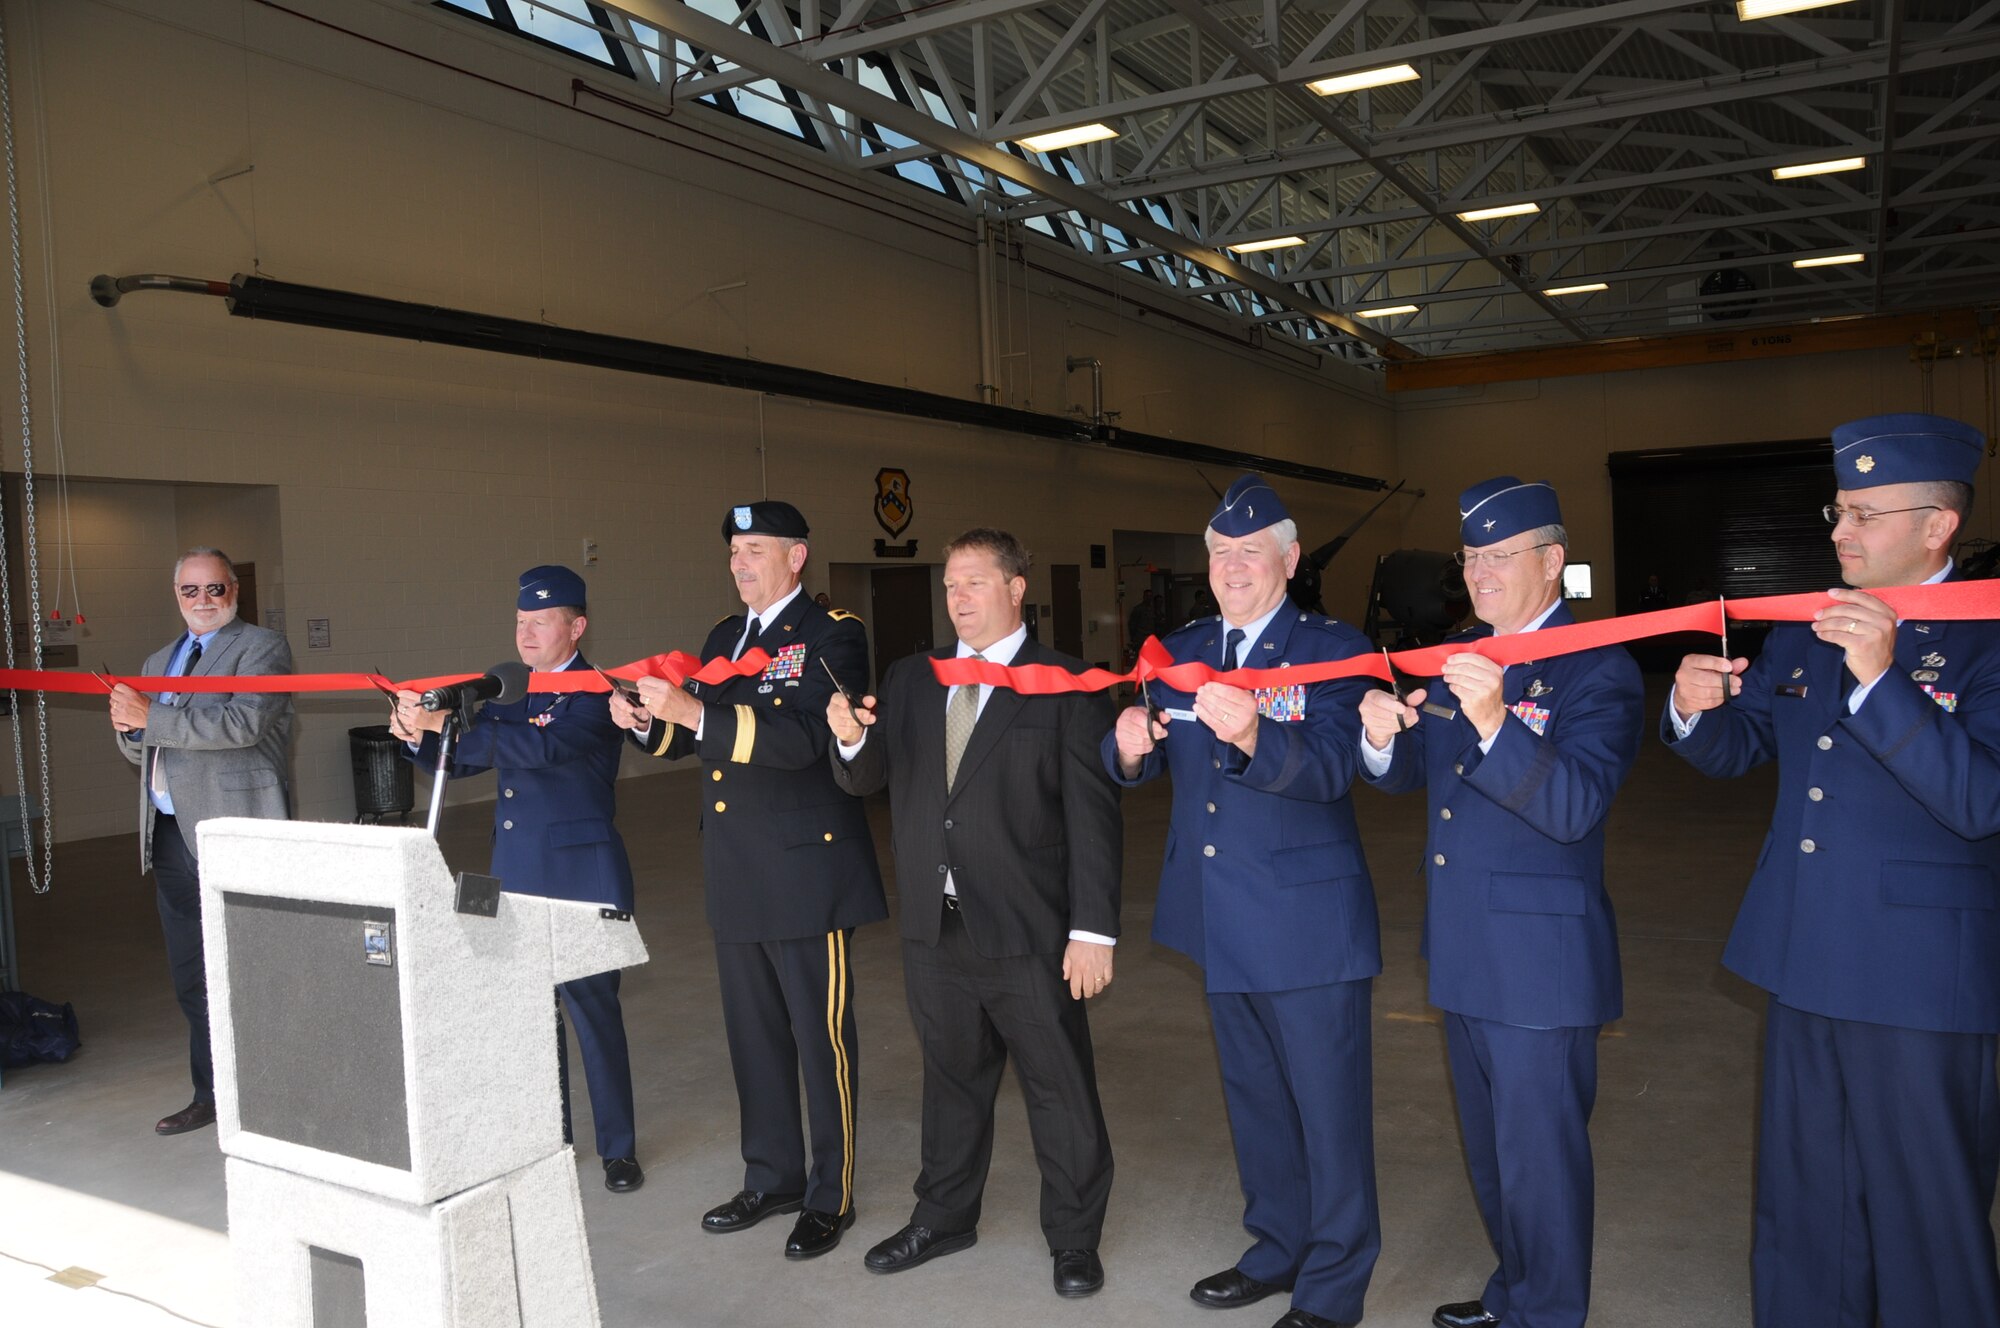 Col. Steve Eggensperger (second from left), 189th Airlift Wing commander, cuts the ceremonial ribbon May 15, 2011, for the new 189th AW engine shop at Little Rock Air Force Base, Ark. With Colonel Eggensperger are (from left) Jimmy Rowe, Wilkins Construction Inc. project superintendent; Maj. Gen. William Wofford, the Arkansas National Guard Adjutant General; Edwin Cromwell Levy with Cromwell’s Architects and Engineers; Brig. Gen. Riley Porter, Arkansas National Air Control Group commander; Brig. Gen. Dwight Balch, Arkansas Air National Guard commander; and Maj. Paul Jara, 189th Civil Engineer Squadron commander. (U.S. Air Force photo/Master Sgt. Dianna Seerey)